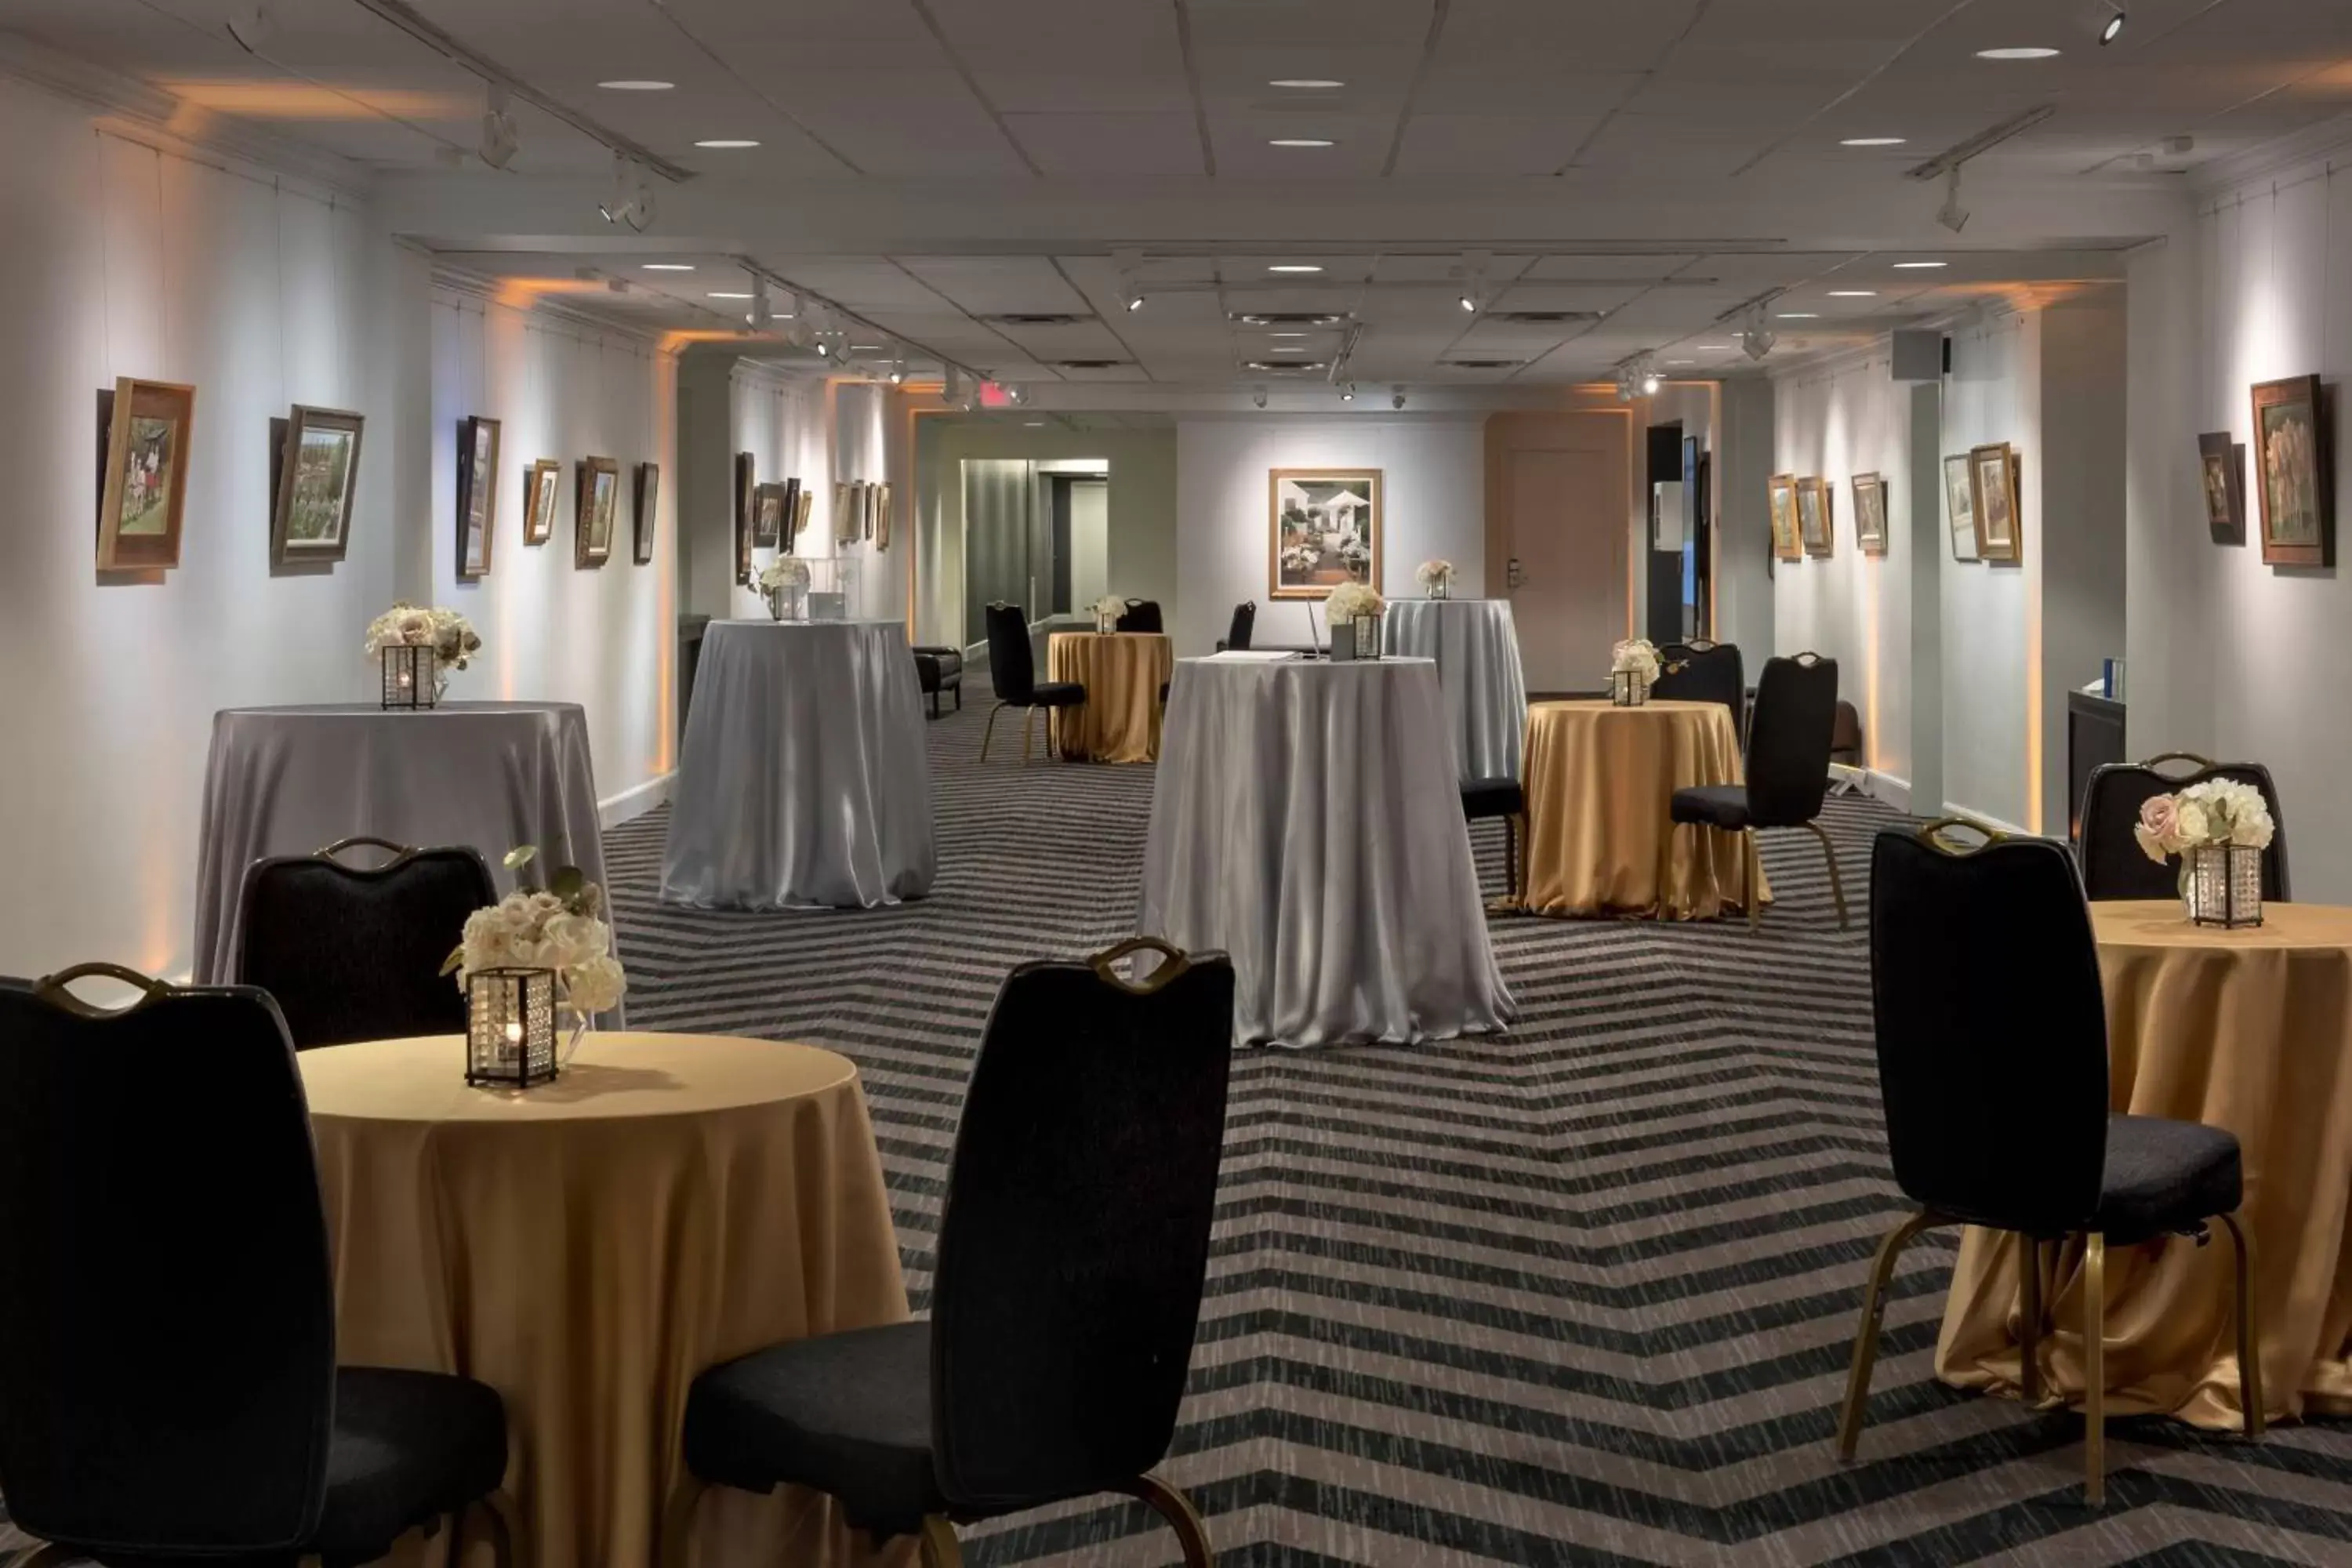 Meeting/conference room, Banquet Facilities in College Park Marriott Hotel & Conference Center